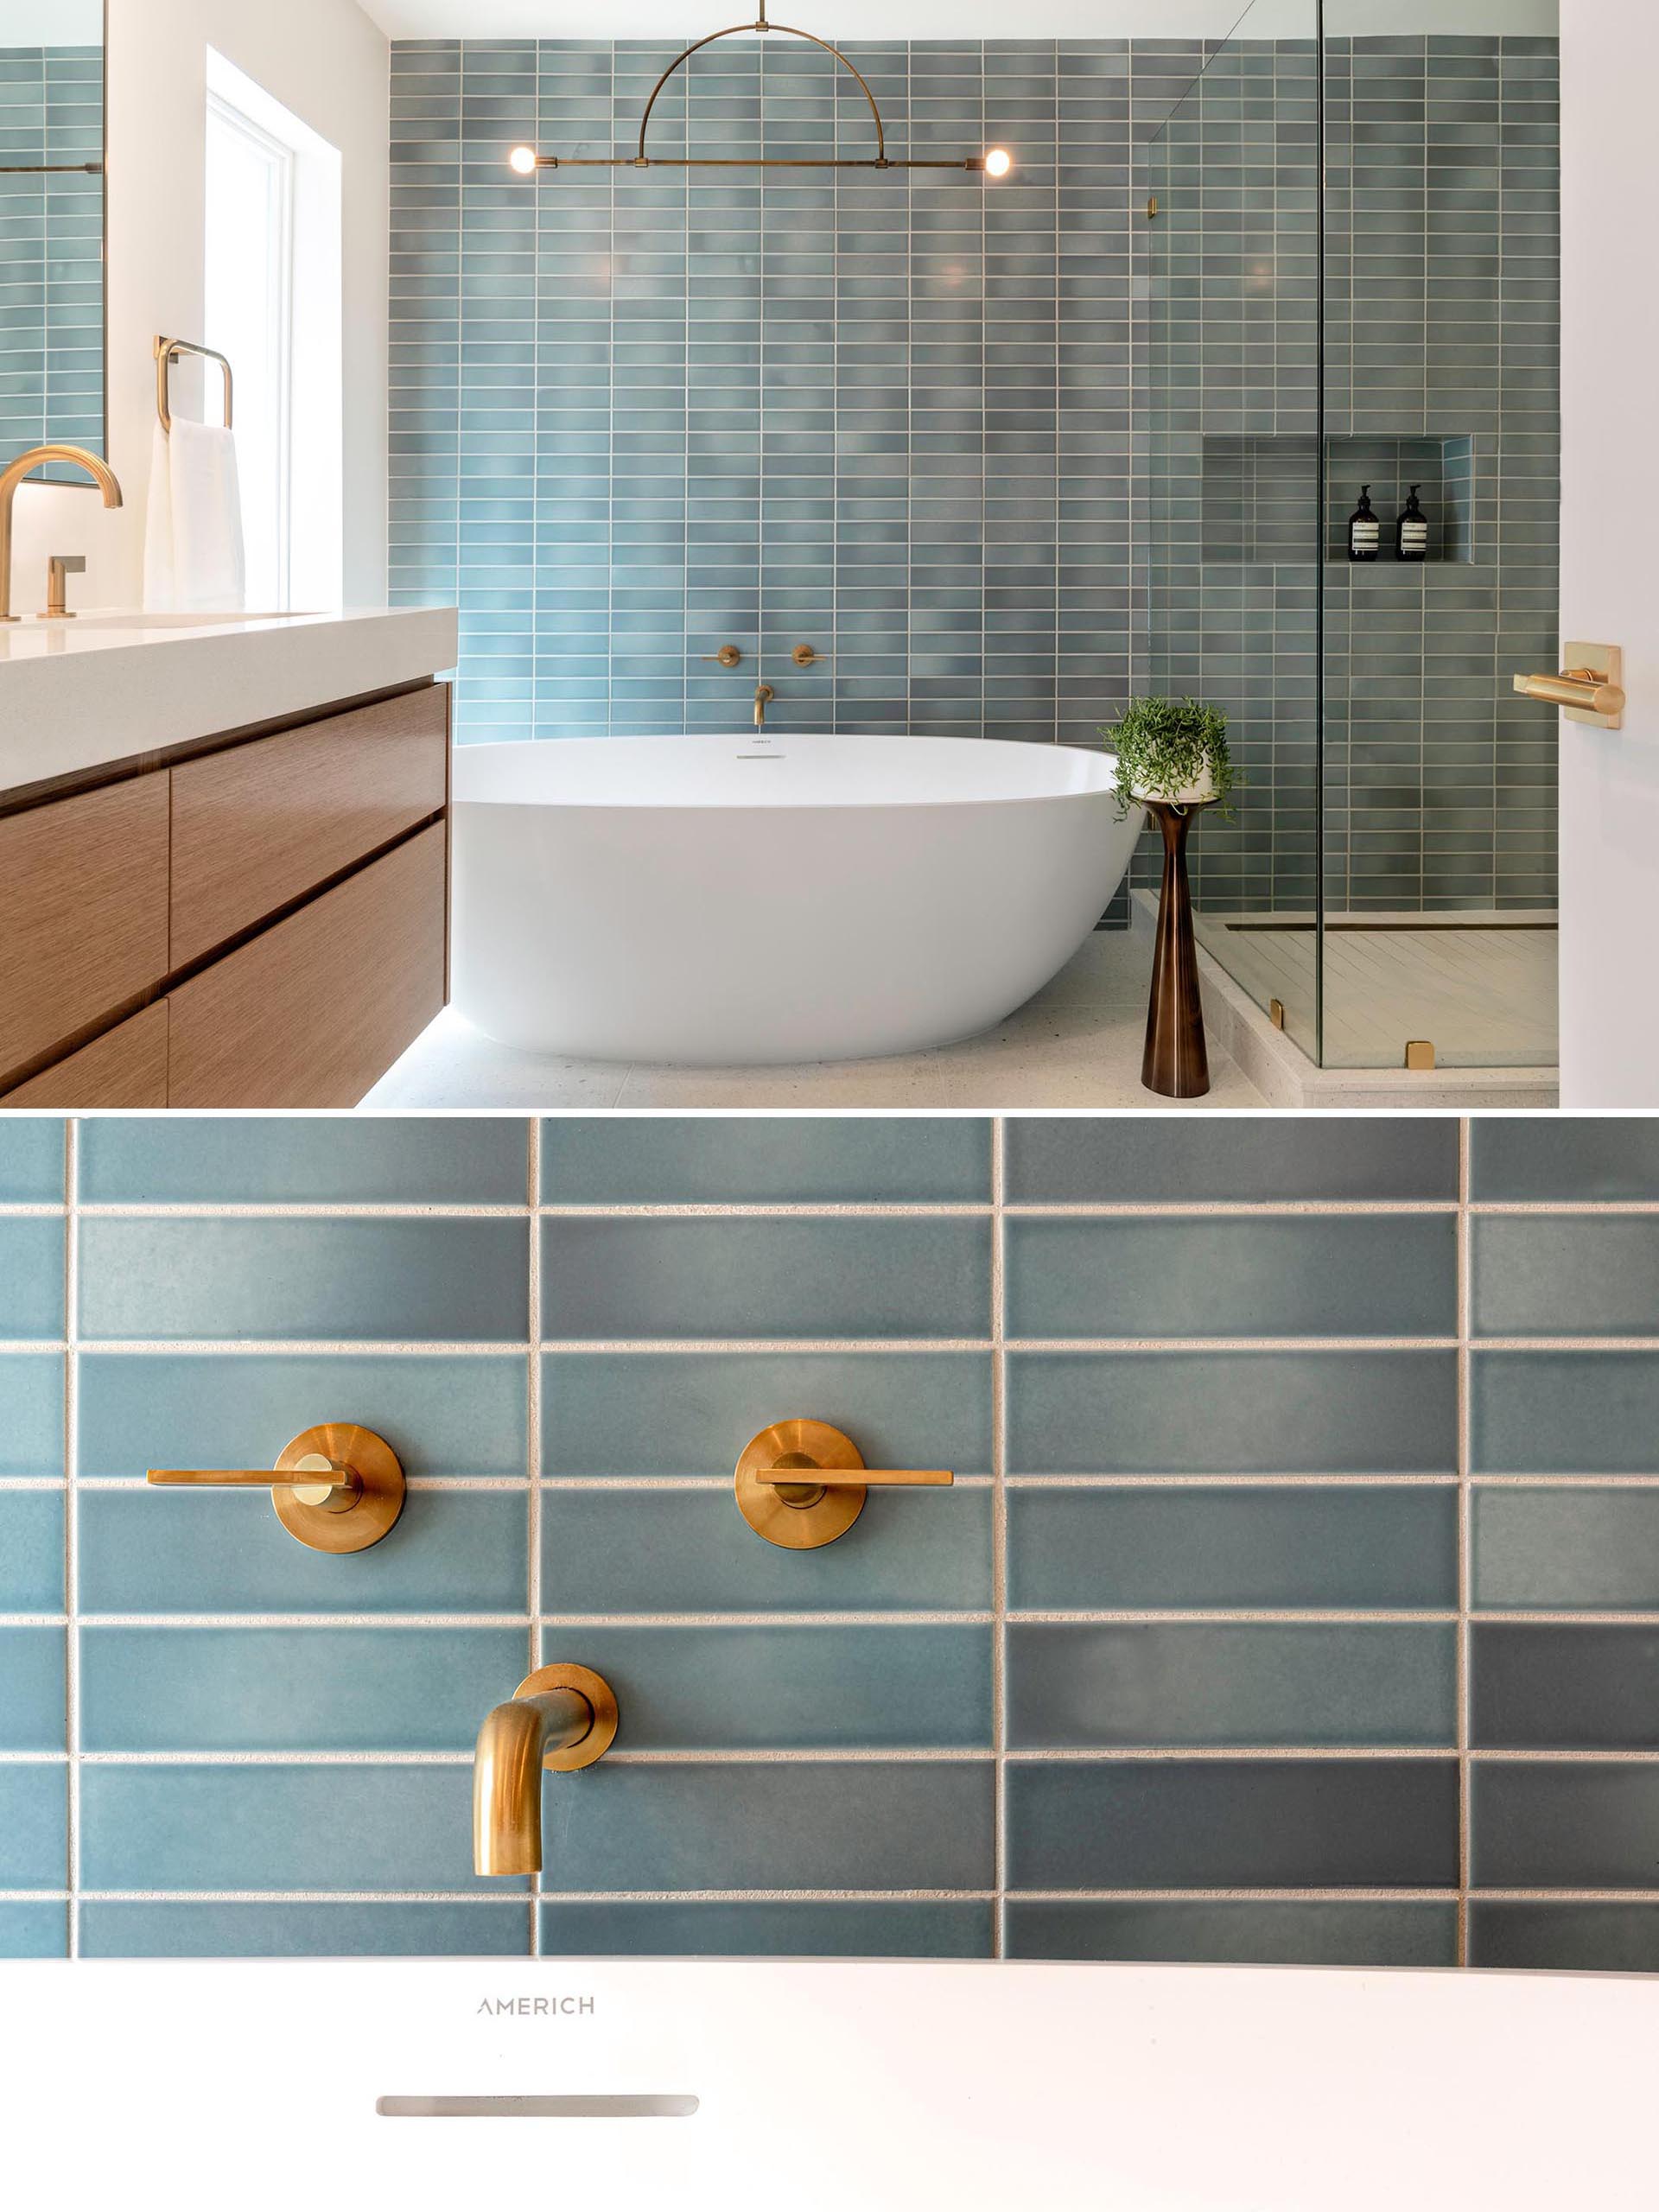 This modern bathroom with blue rectangular wall tile, a minimalist light fixture, a freestanding white bathtub, and brass fixtures.